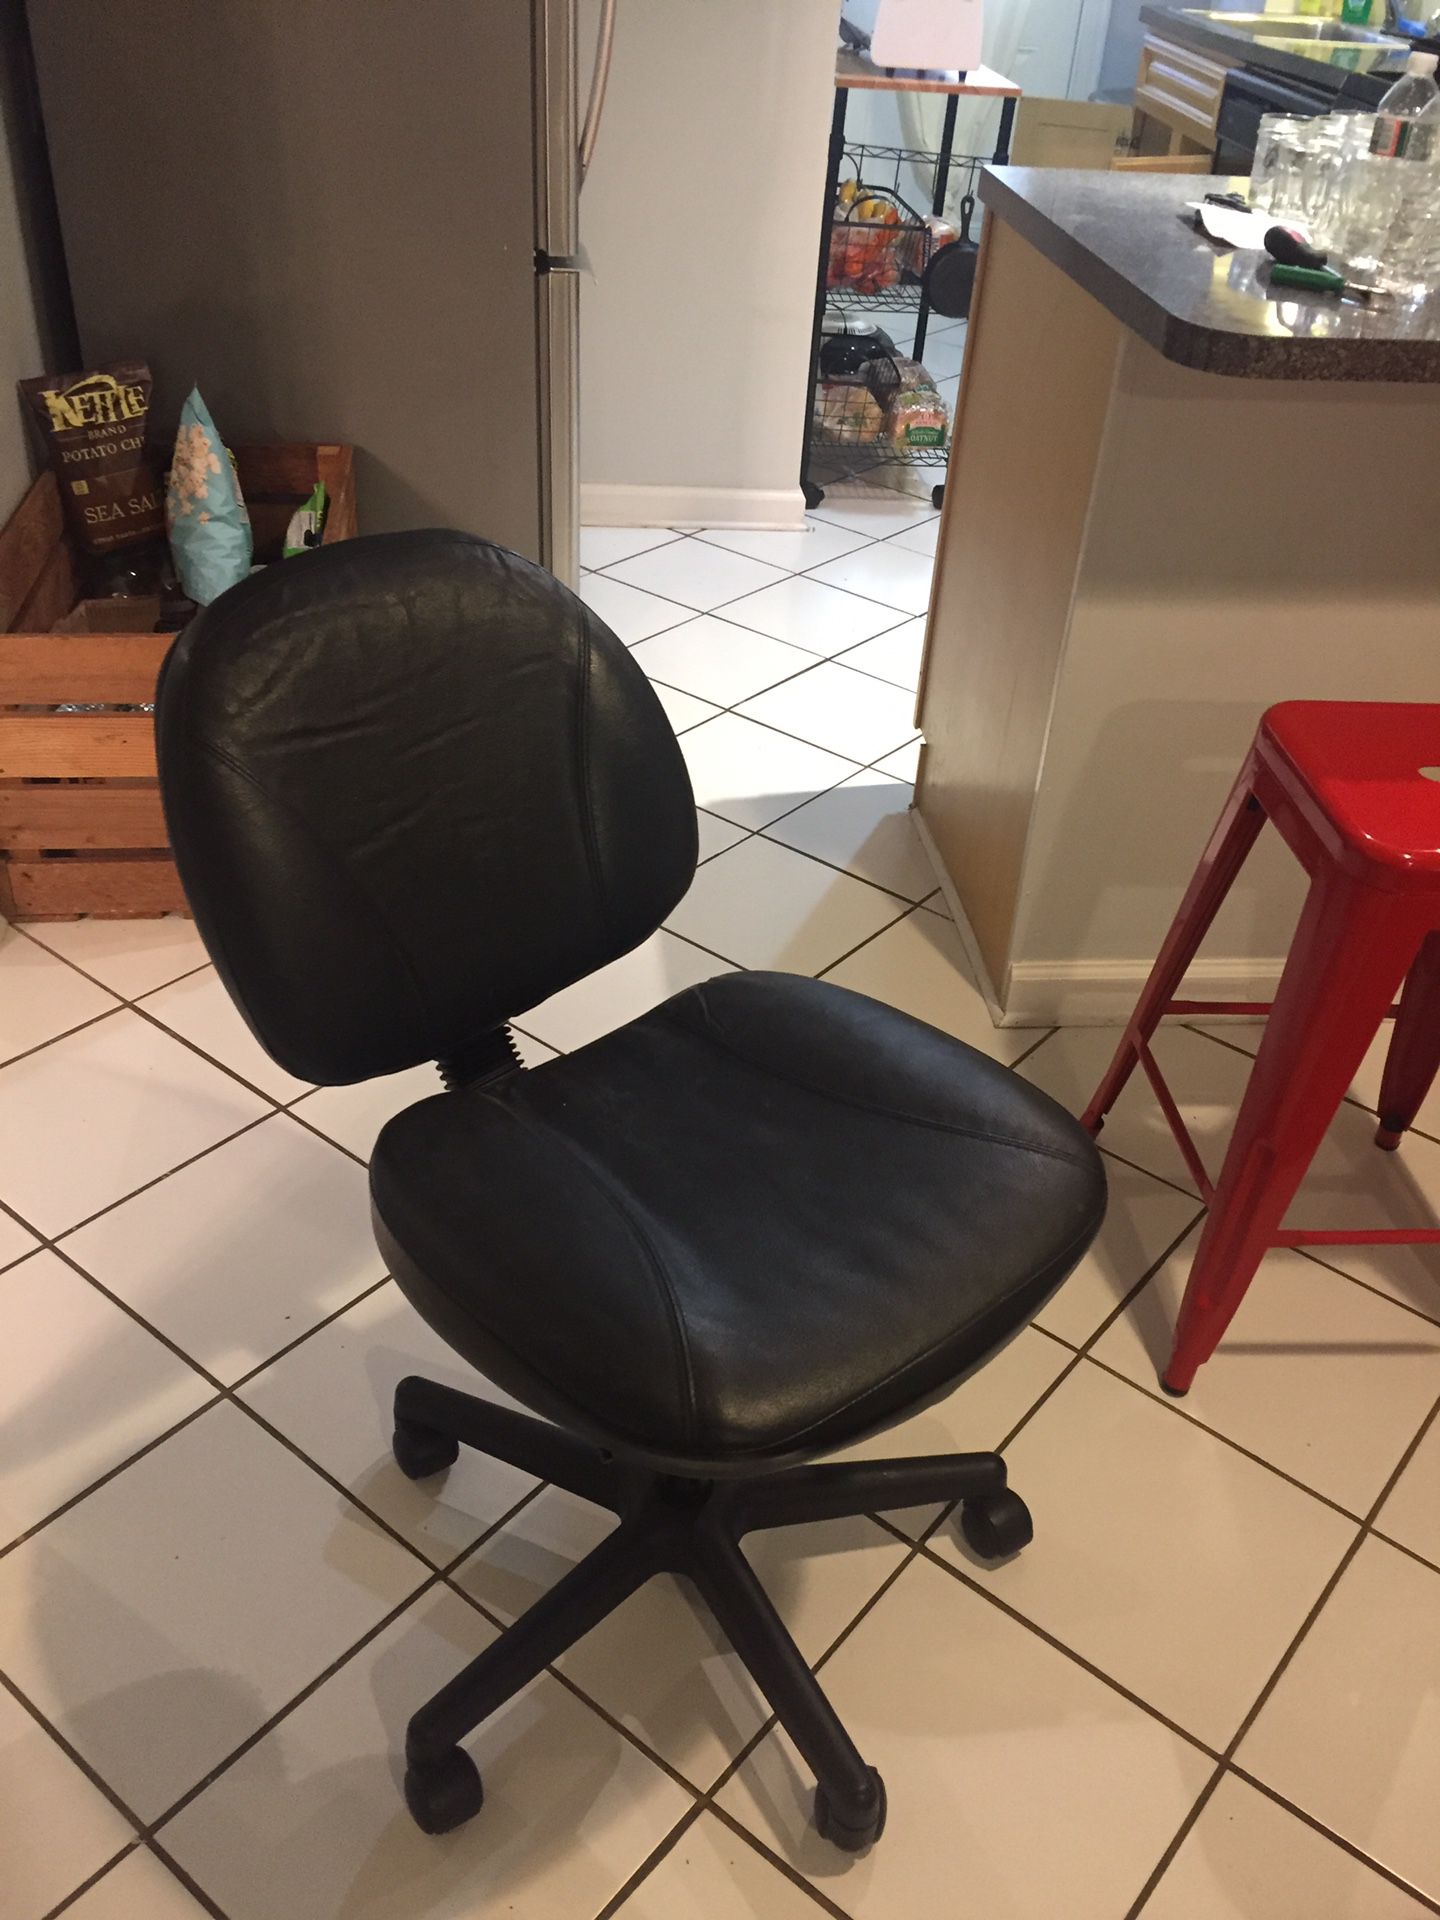 Free tack board /Desk chair and laptop table